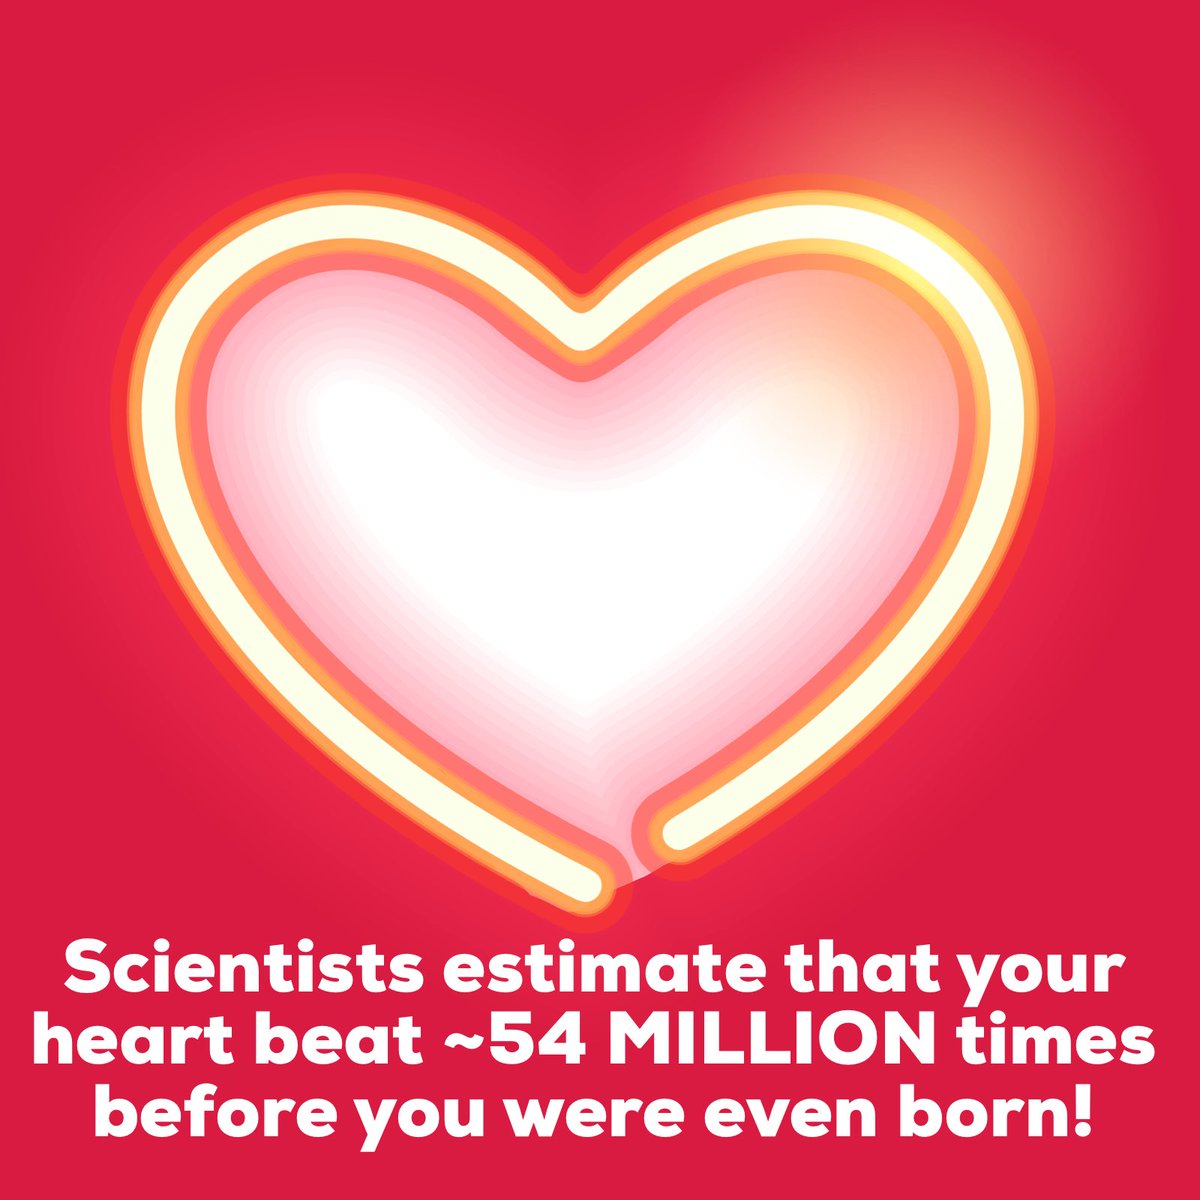 Scientists estimate that your heart beat ~54 MILLION times before you were even born!